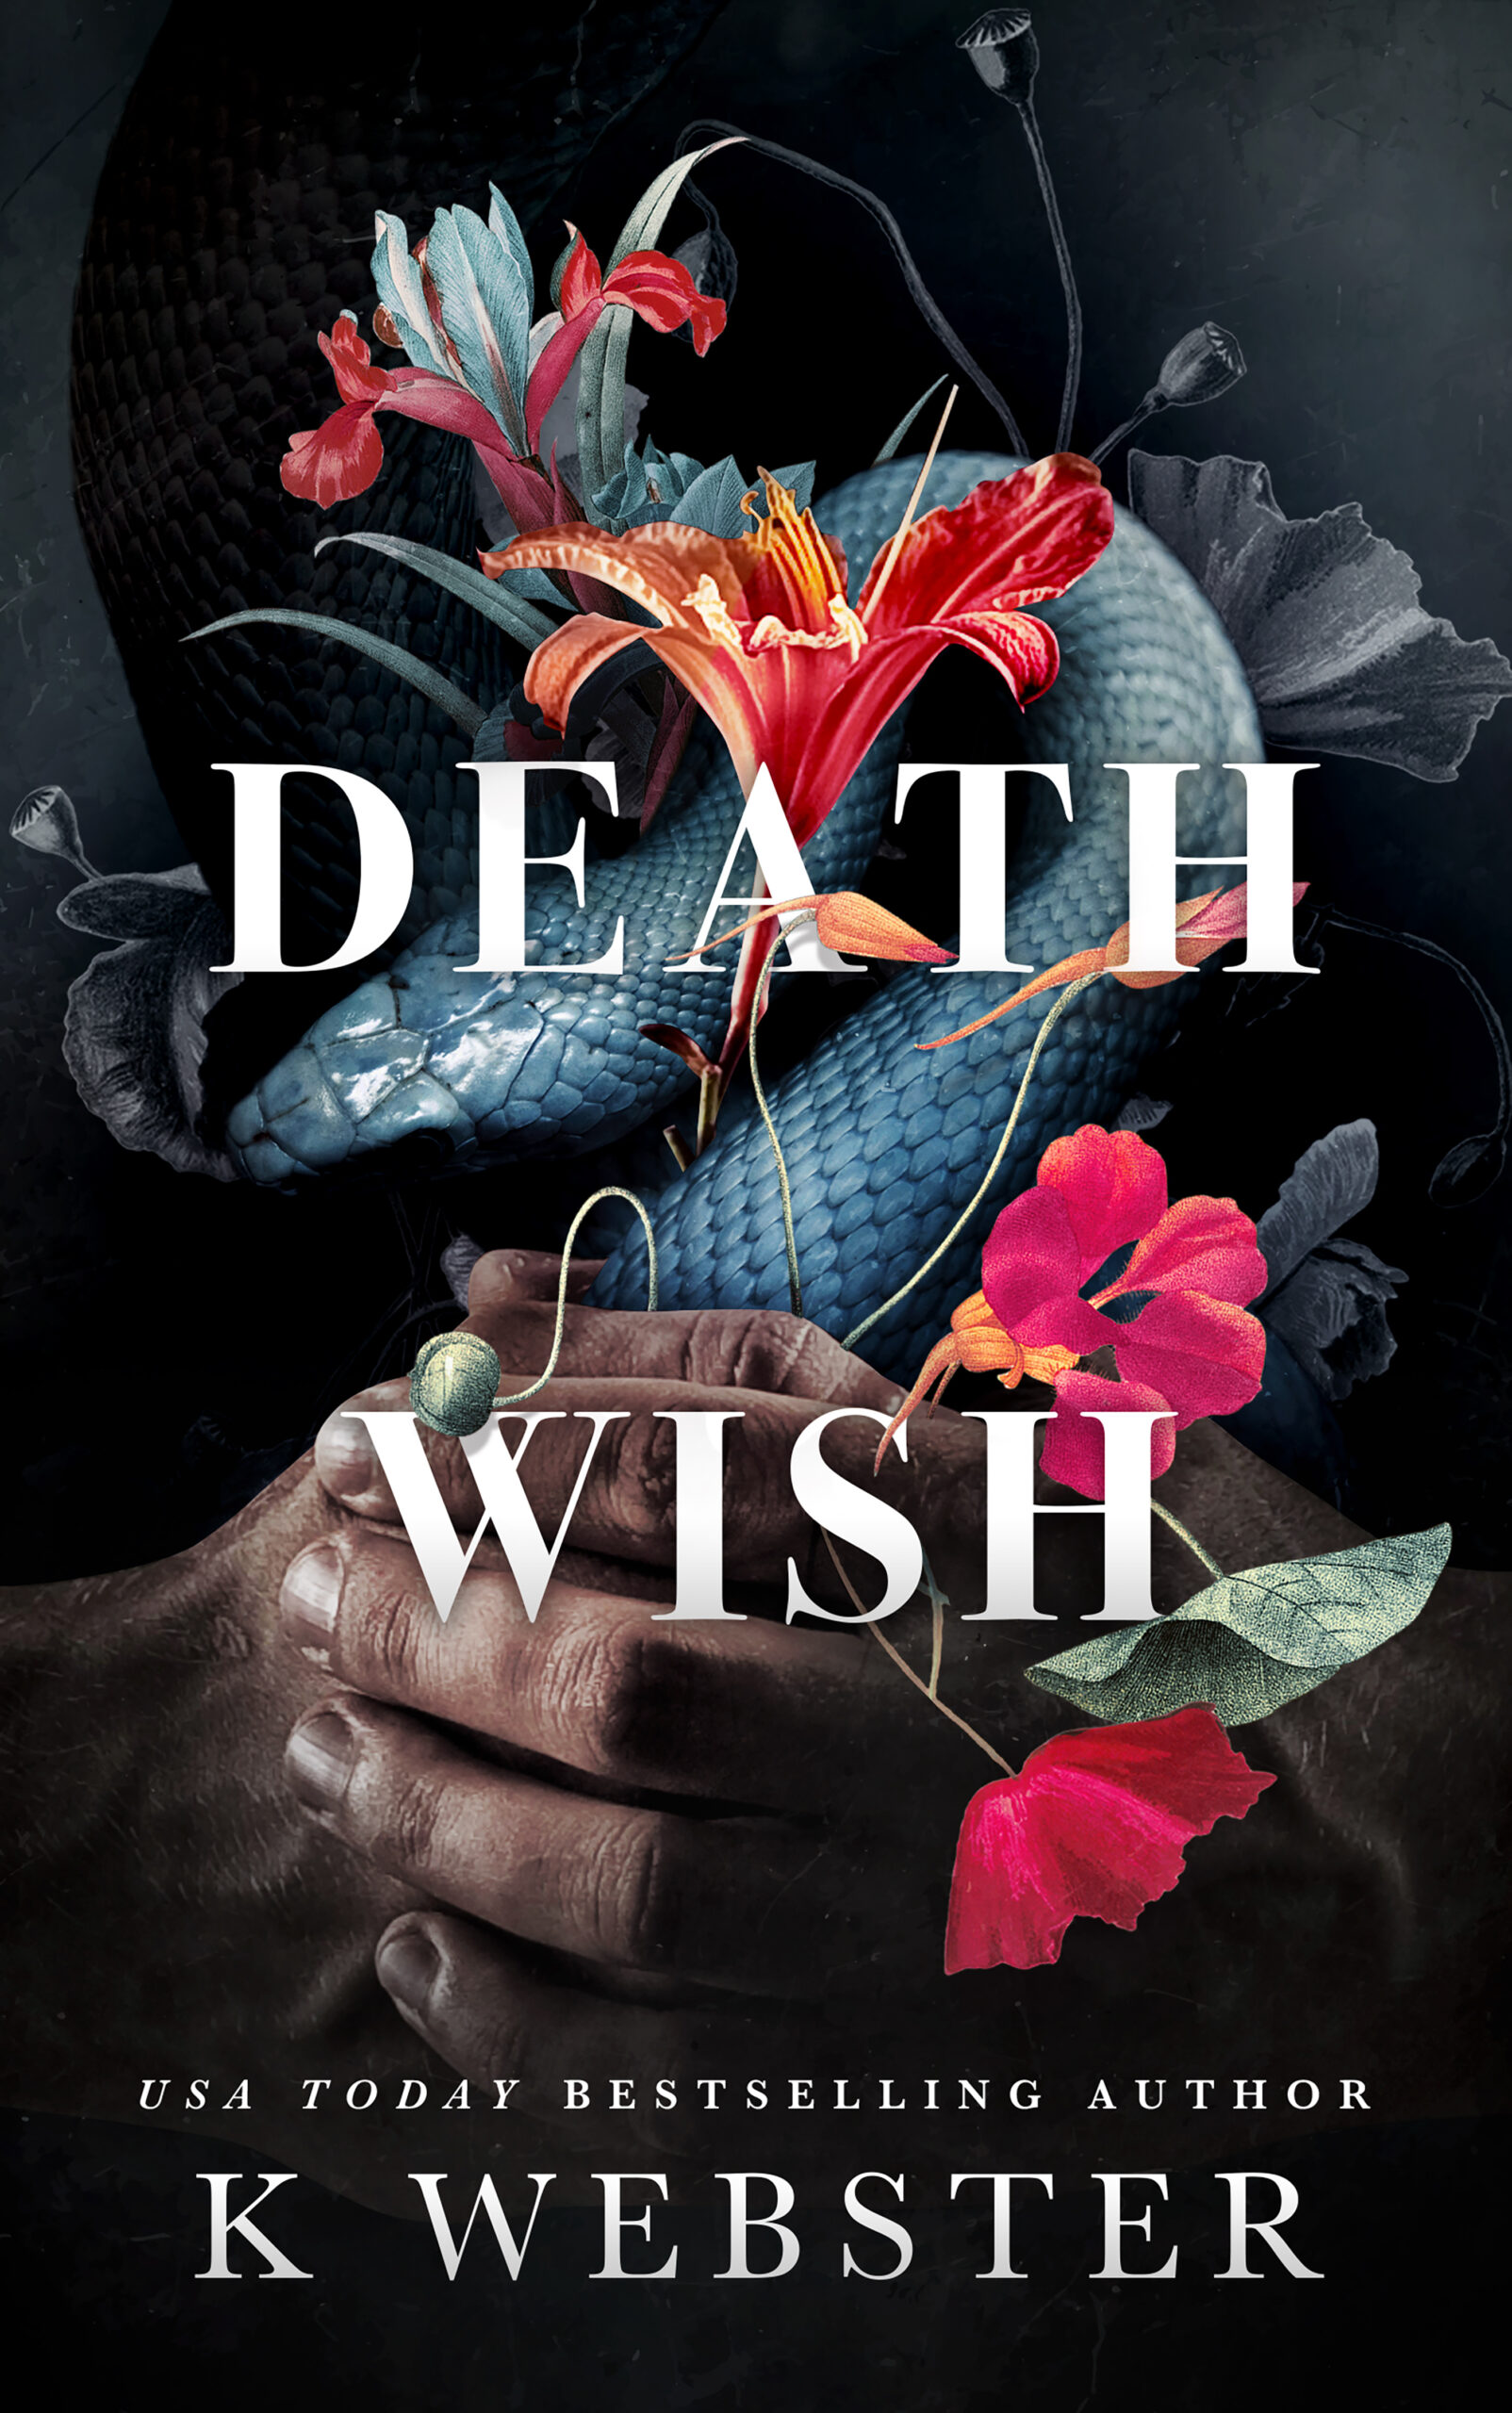 Book Cover: Death Wish by K Webster